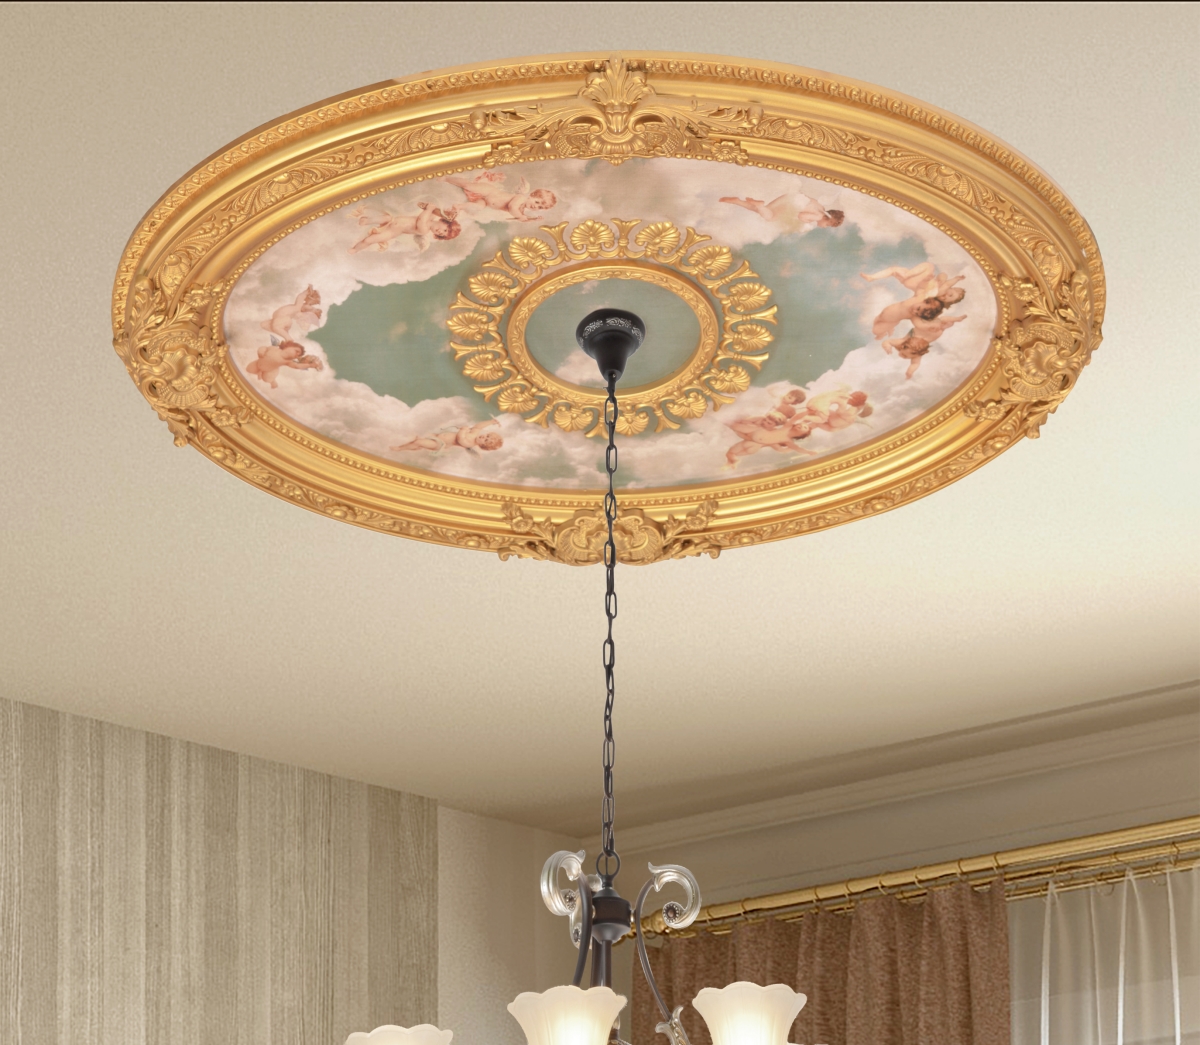 Picture of AFD Home 12020509 44 in. Cherubs Sky Oval Chandelier Ceiling Medallion, Multi Color